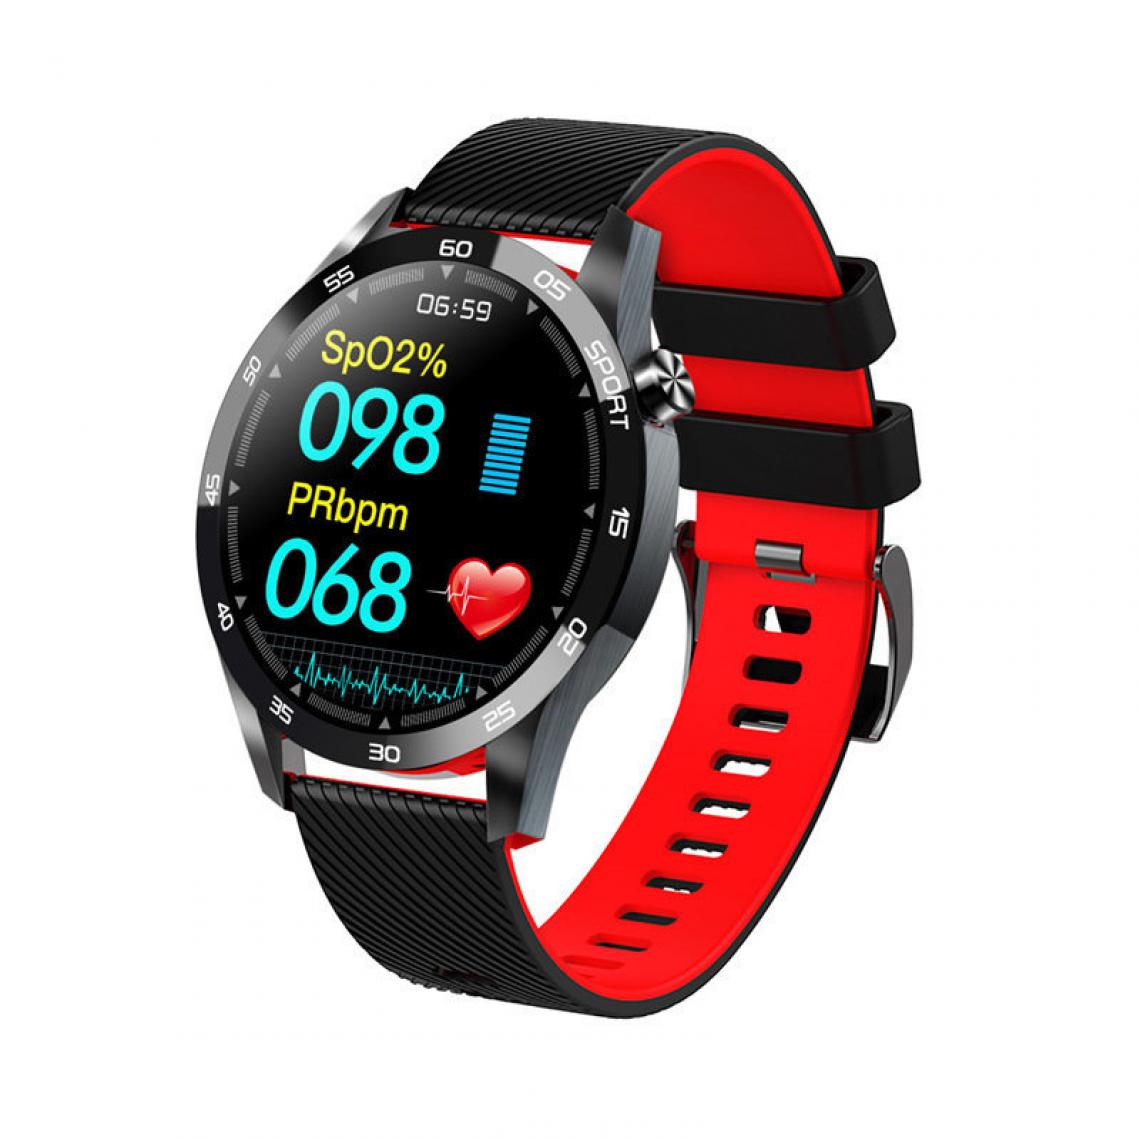 Chronotech Montres - Smart watch F22L, fitness tracker watch, sports watch activity tracker with 1.54 inch TFT display, fitness watch with IP67 waterproof, pedometer watch for men and women(red) - Montre connectée